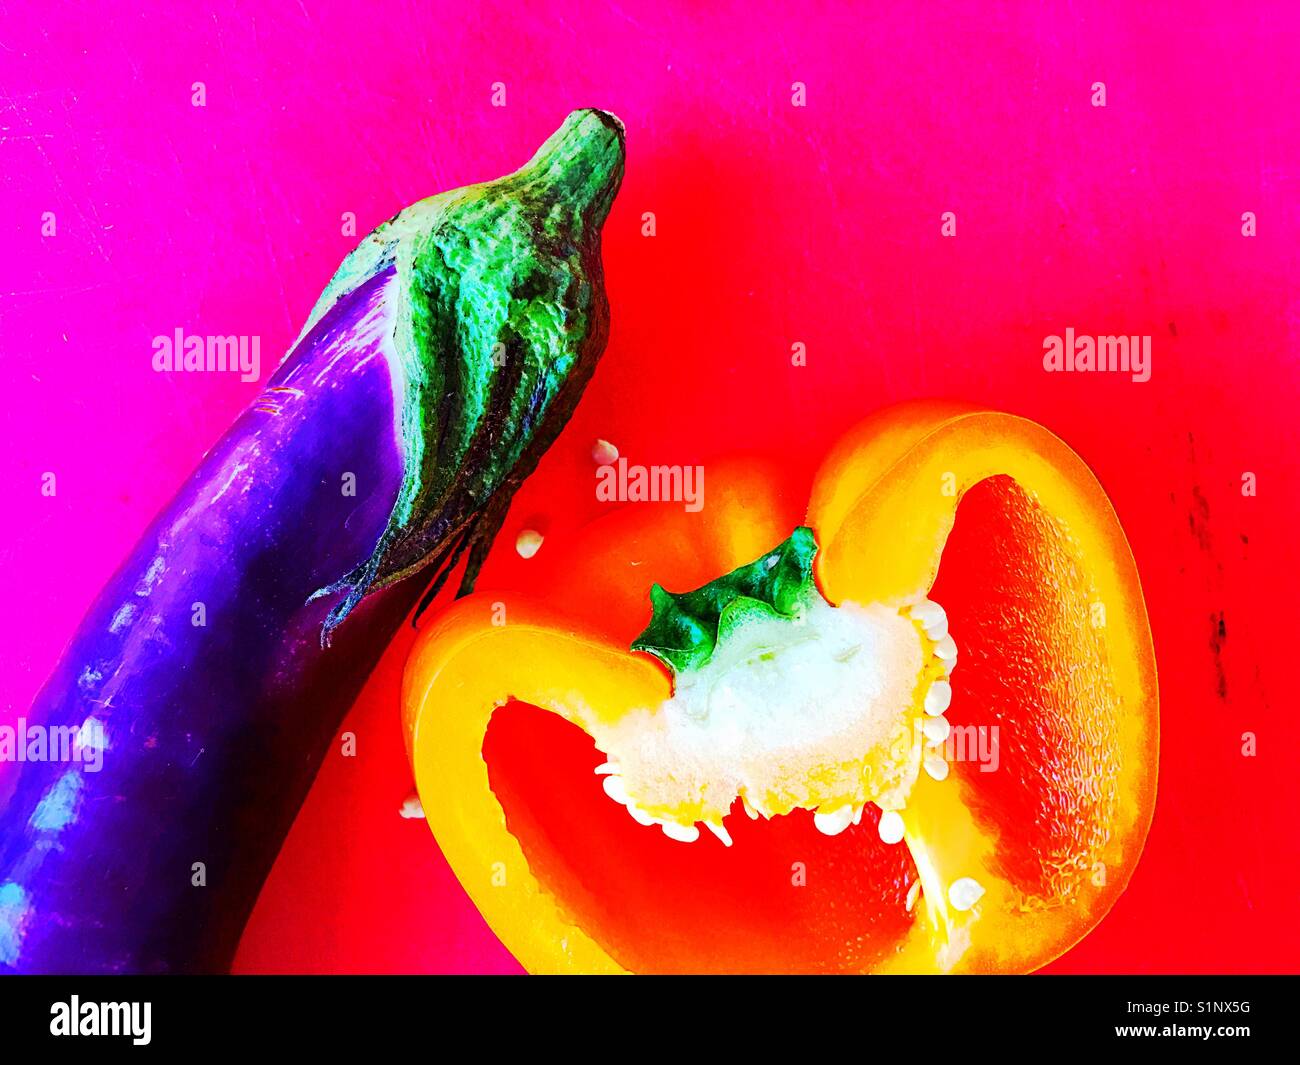 Pepper and eggplant saturated colors Stock Photo